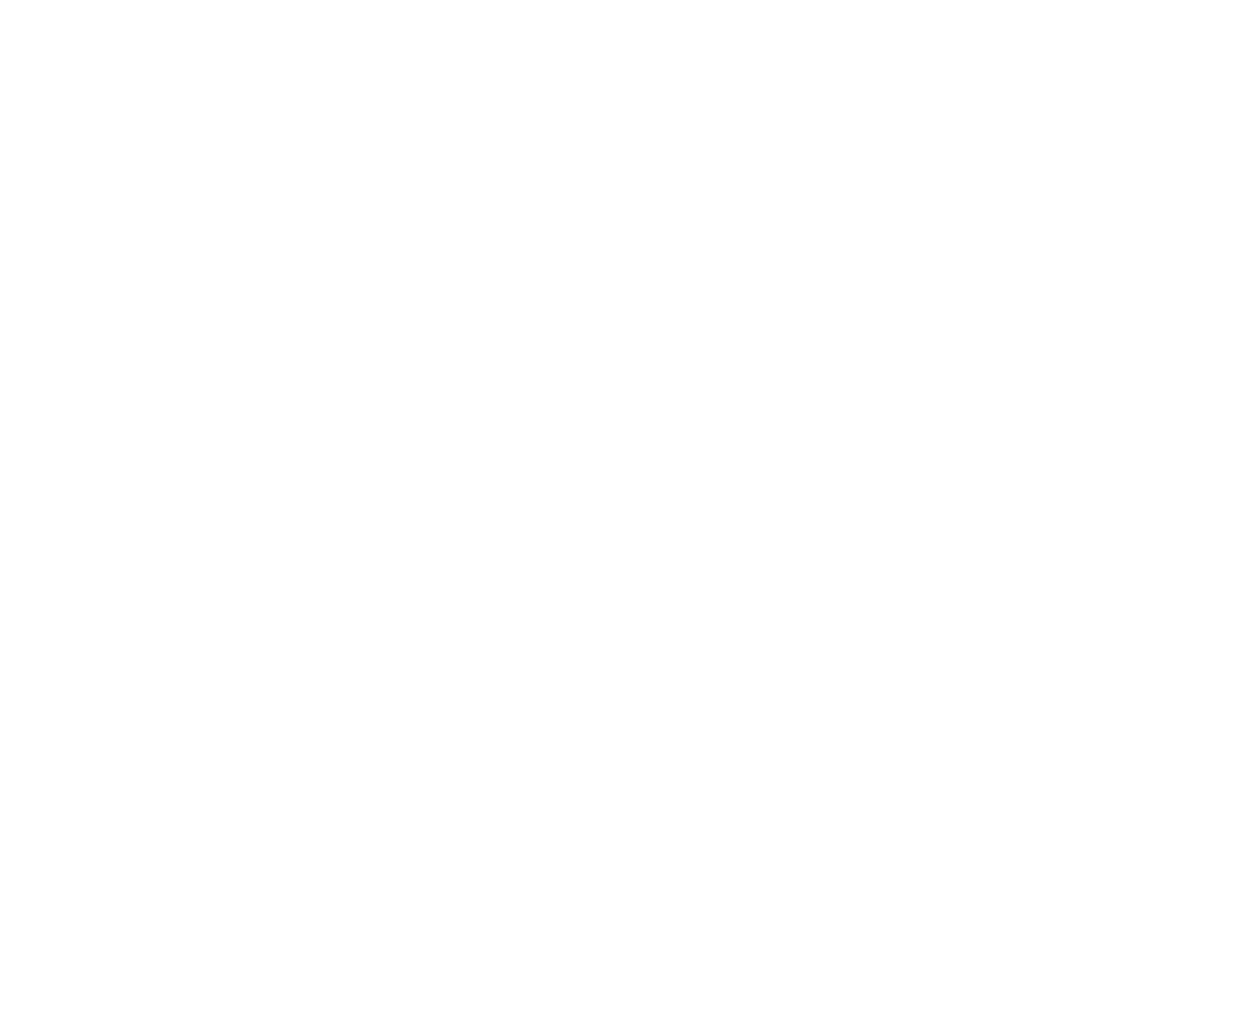 360 image view